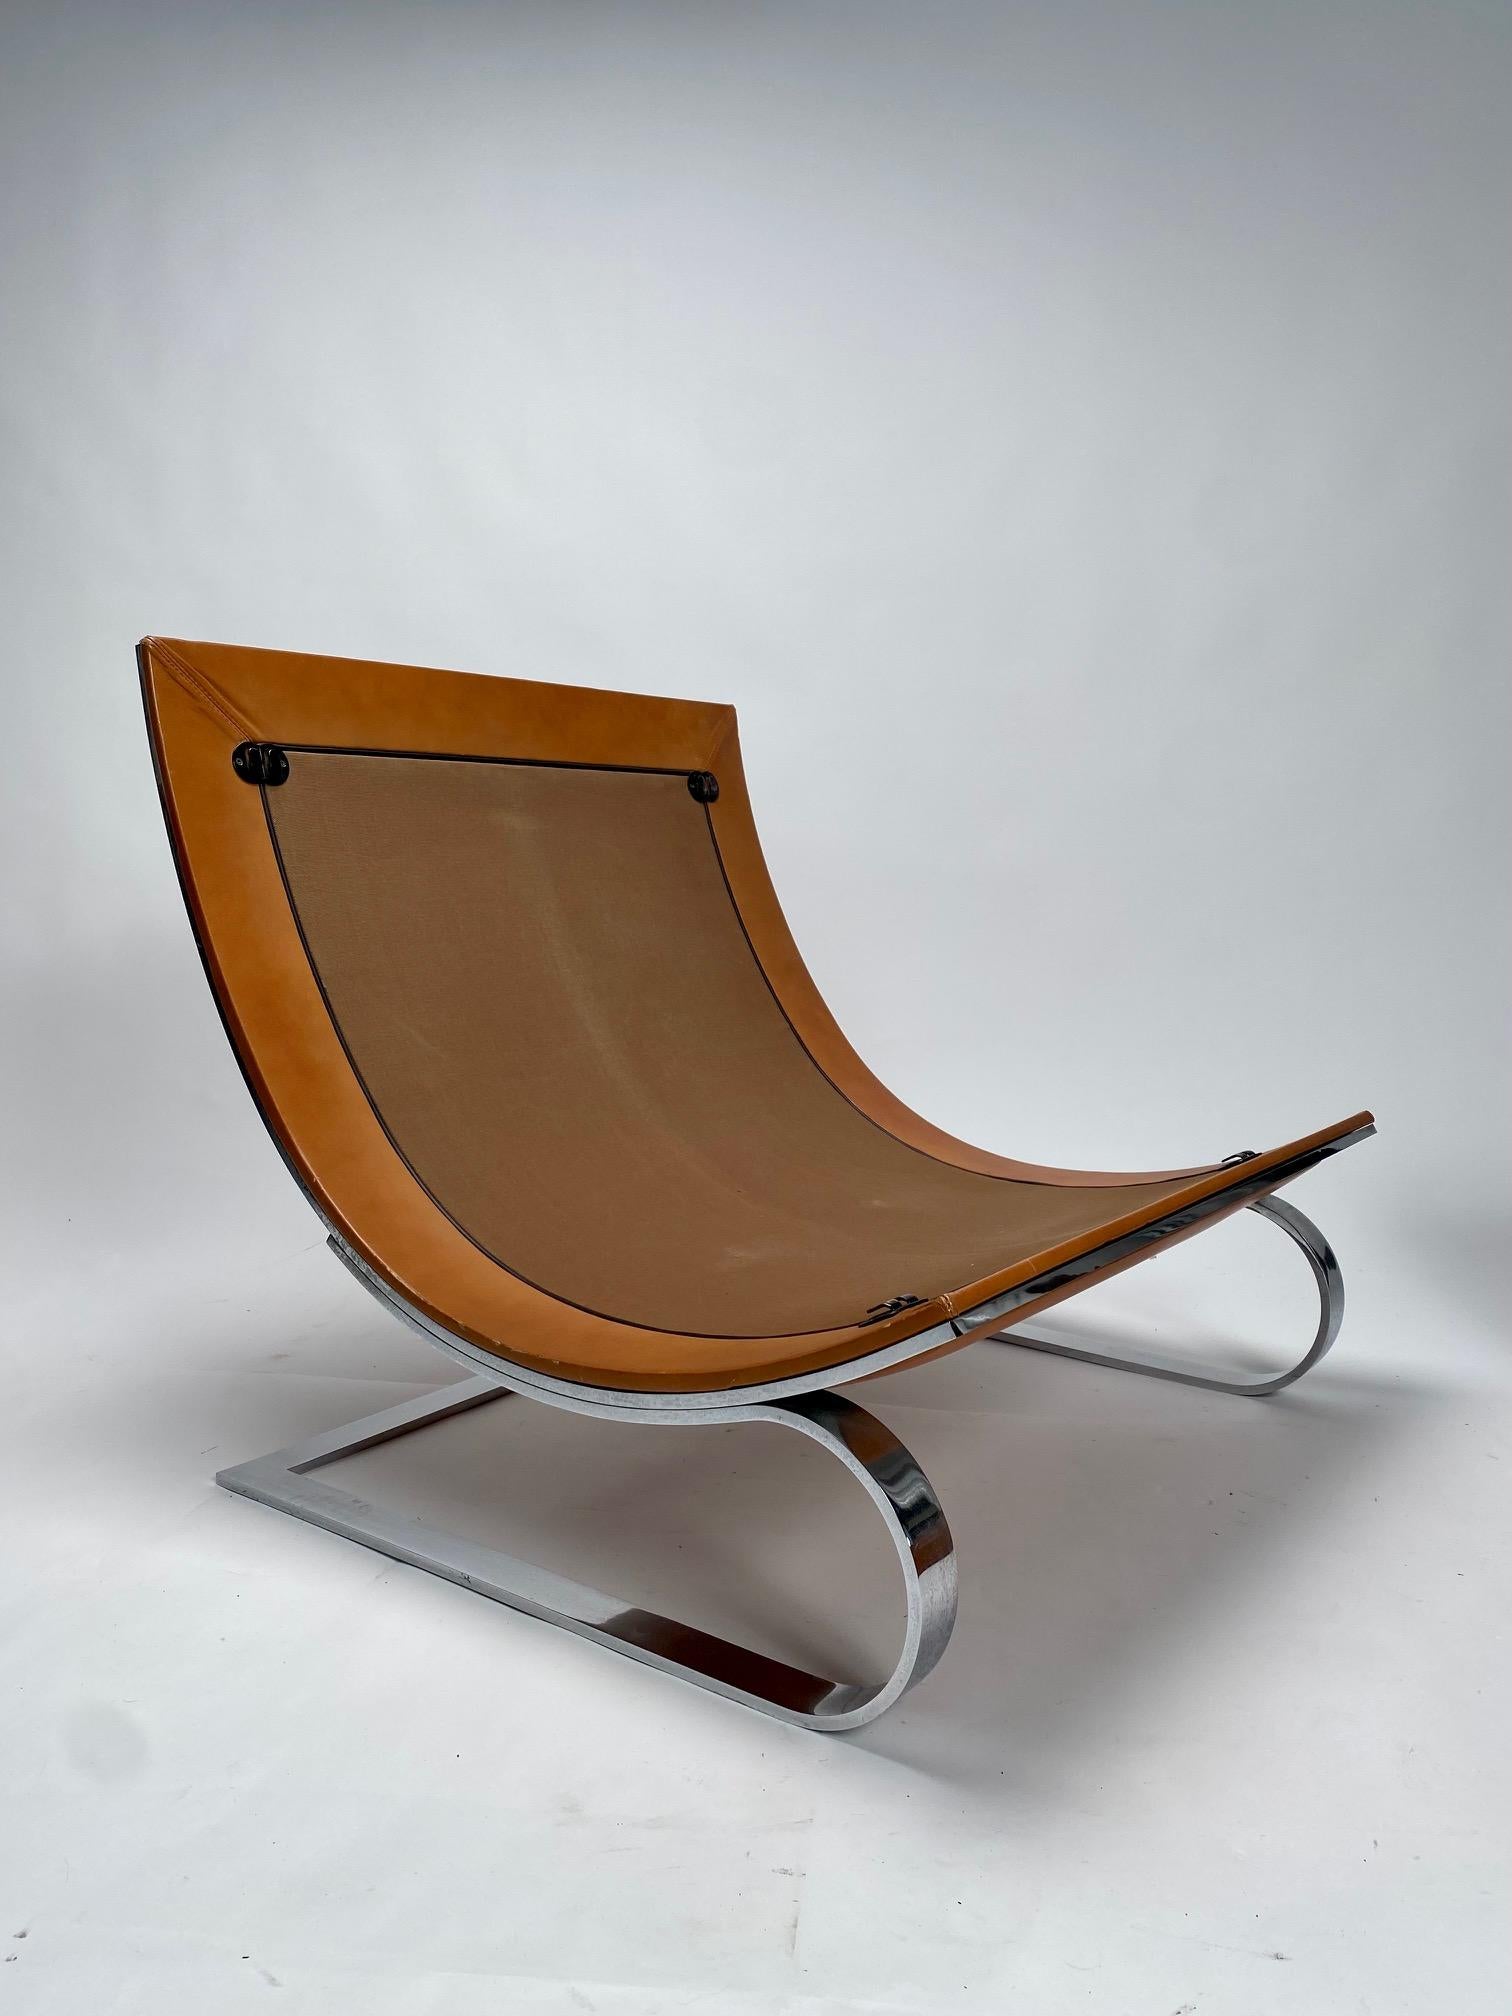 Space Age Lounge Armchair by Renato Balestra for Cinova, Italy 1970s For Sale